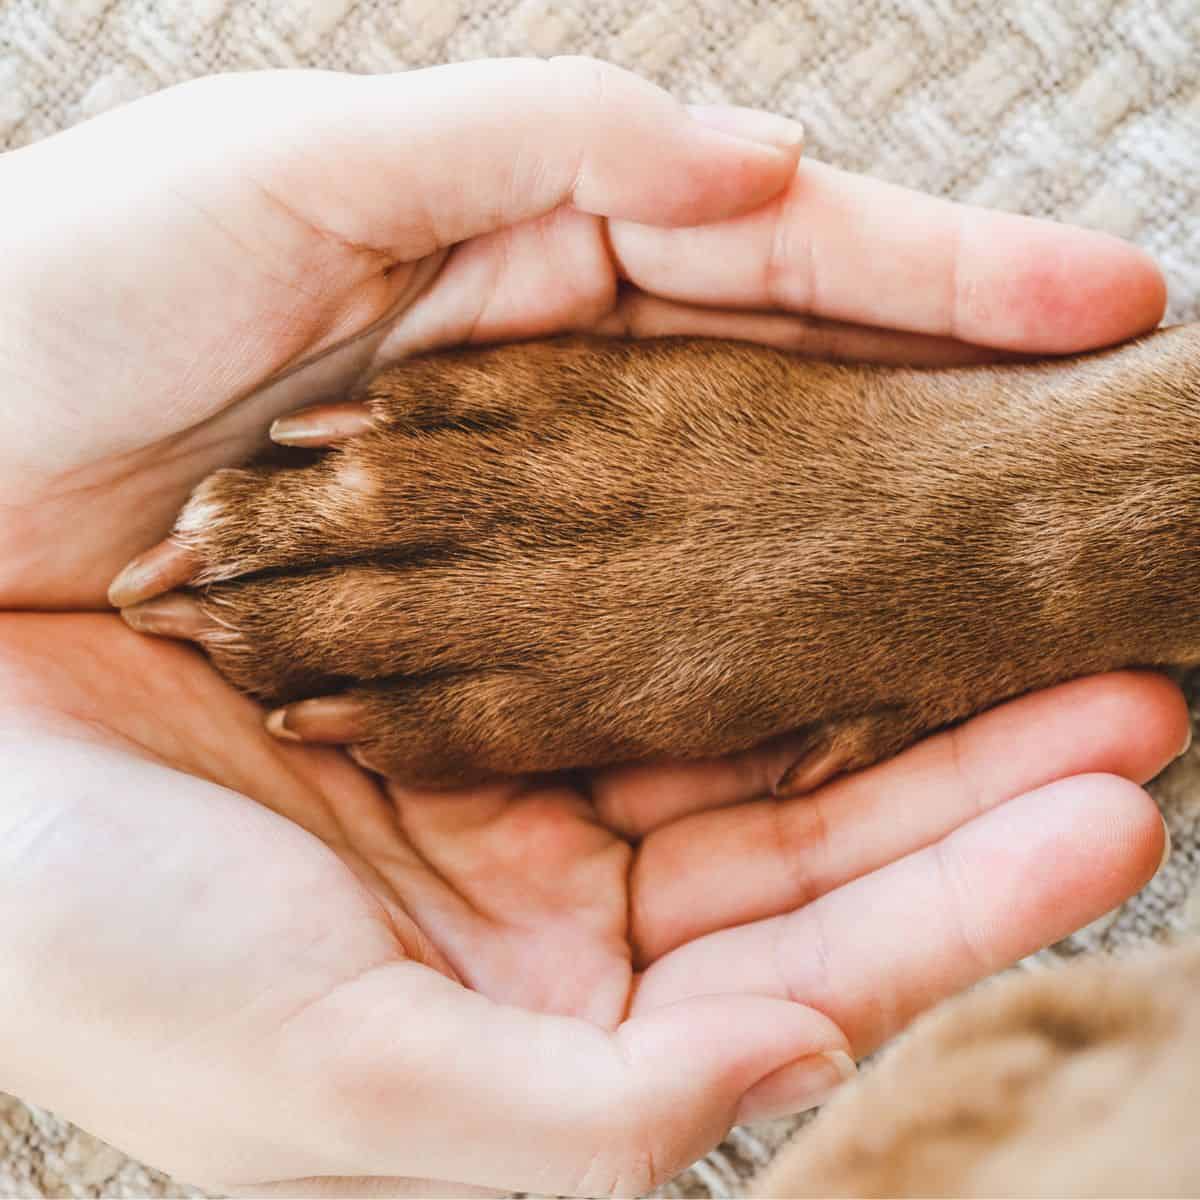 Two hands of a Caucasian person together with a brown dog paw sitting in the hands being held.